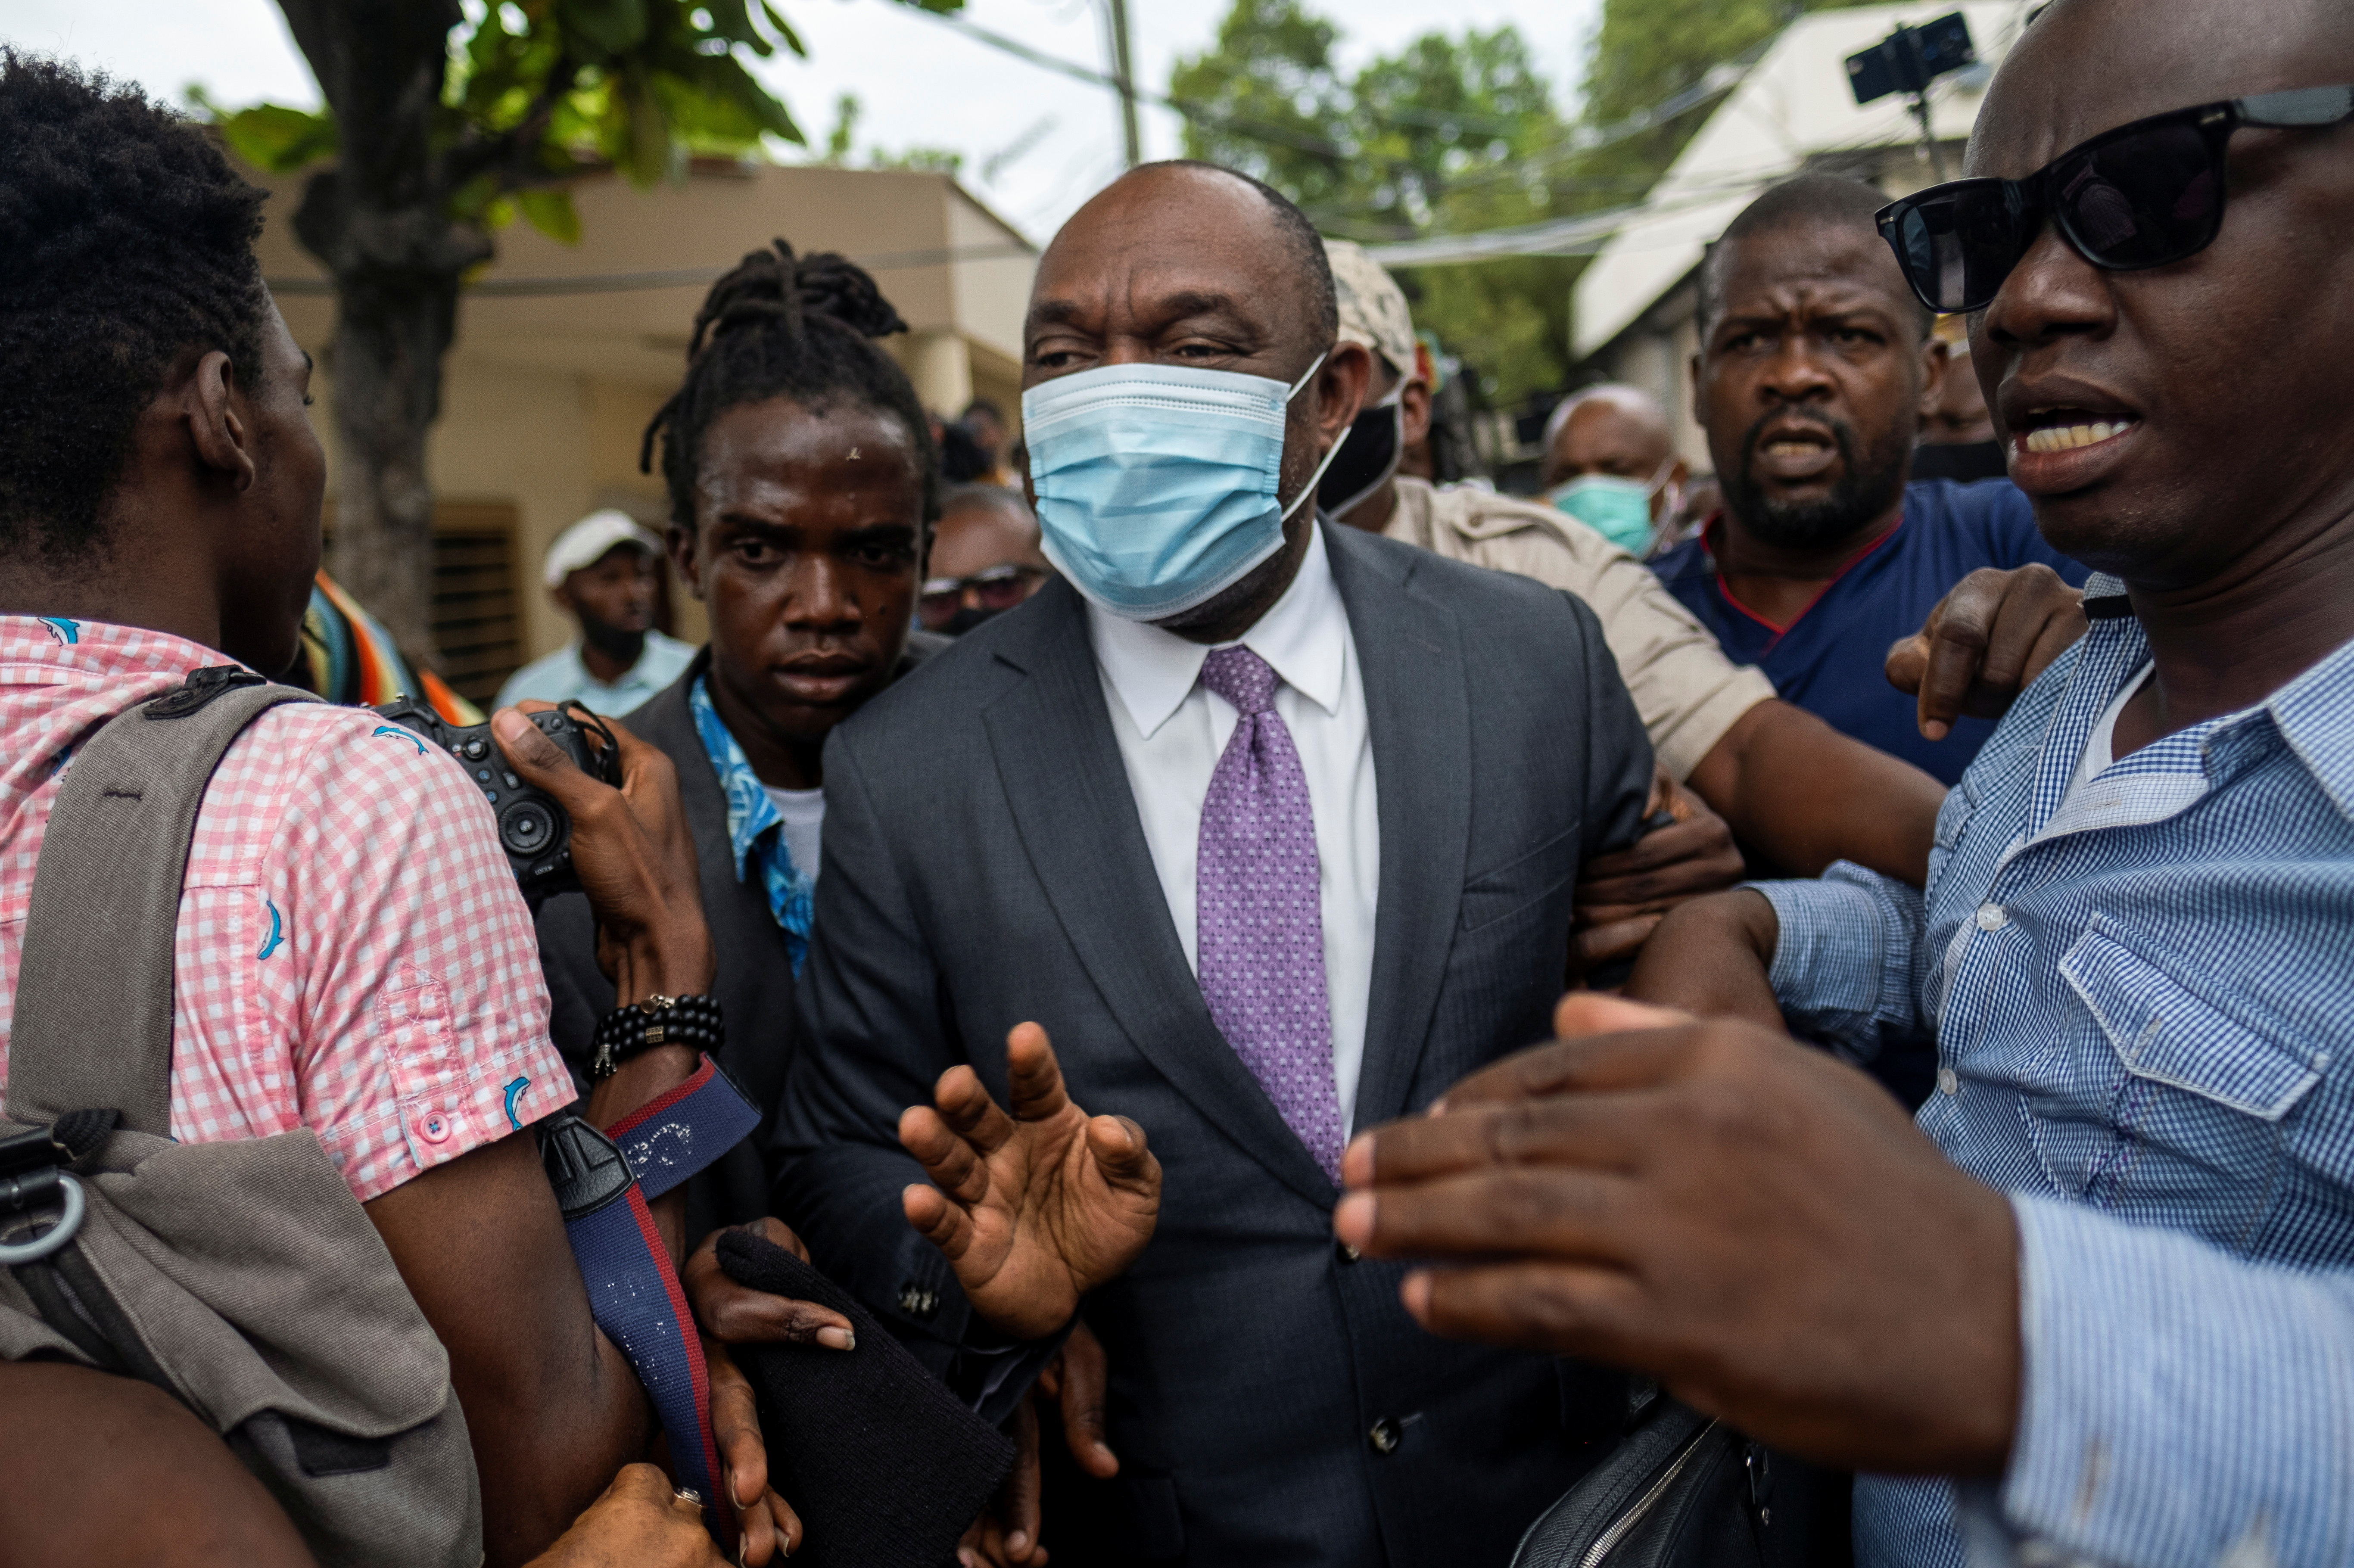 Former senator Youri Latortue wears a face mask as he is escorted by bodyguards outside the court house after a hearing following the assassination of President Jovenel Moise, in Port-au-Prince